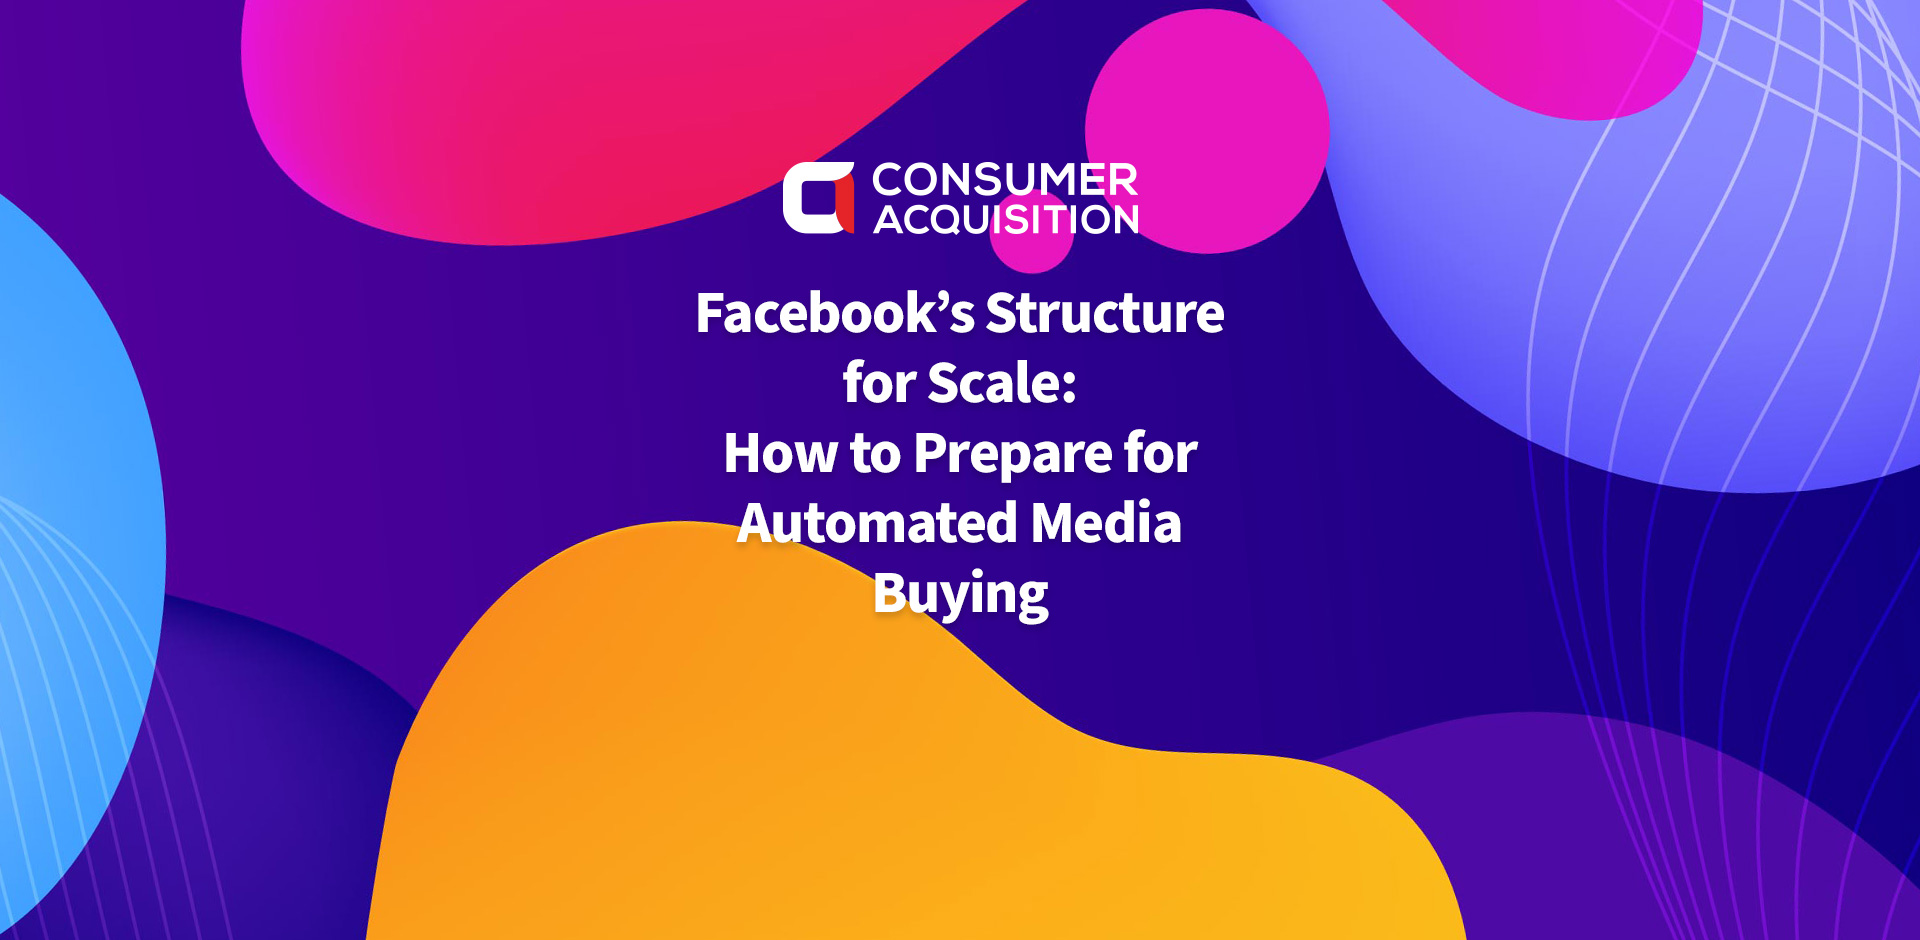 Facebook’s Structure for Scale: How to Prepare for Automated Media Buying